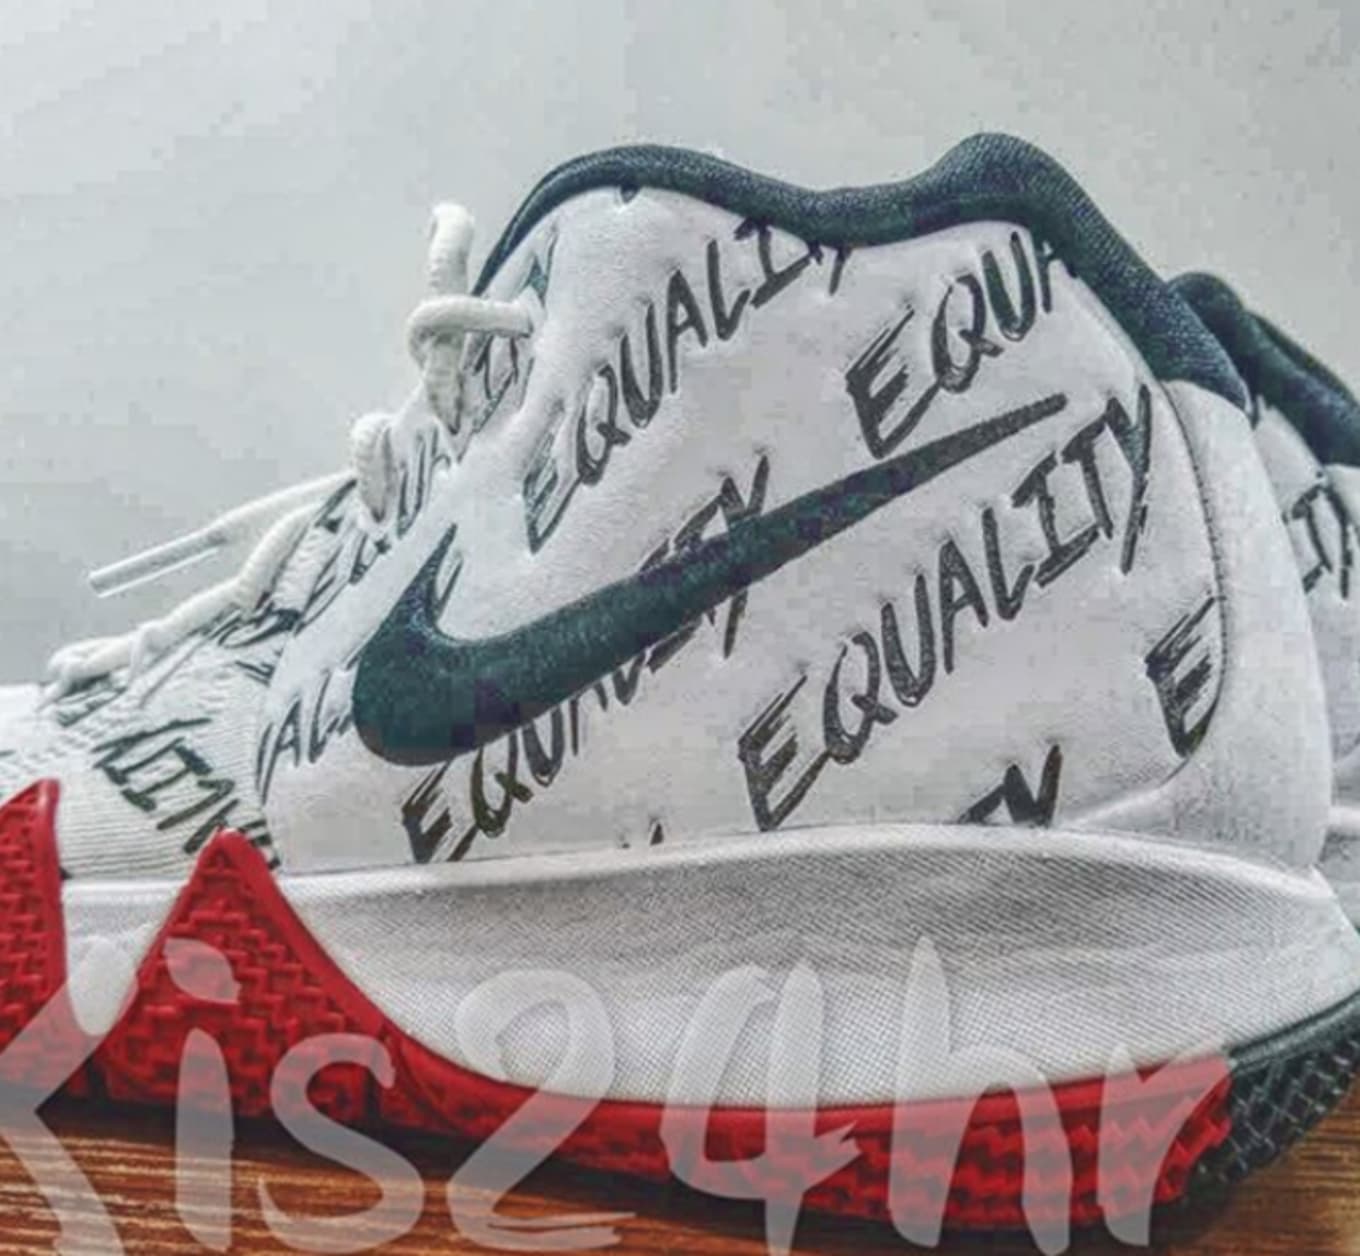 equality shoes kyrie